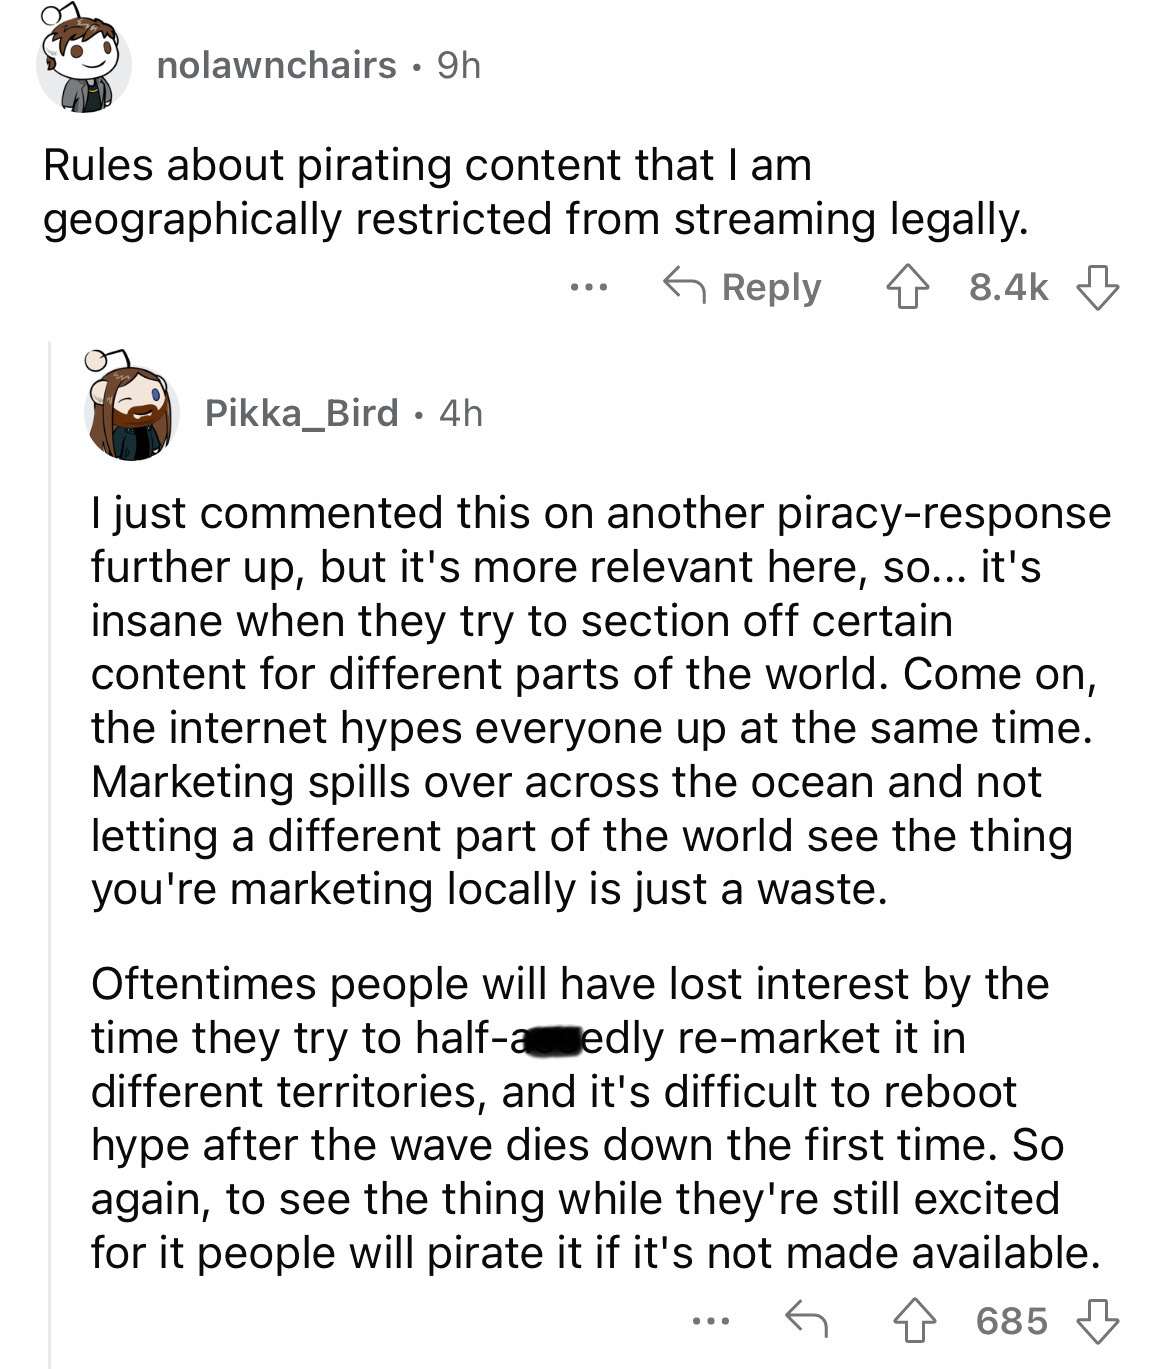 angle - nolawnchairs 9h Rules about pirating content that I am geographically restricted from streaming legally. Pikka_Bird 4h ... I just commented this on another piracyresponse further up, but it's more relevant here, so... it's insane when they try to 